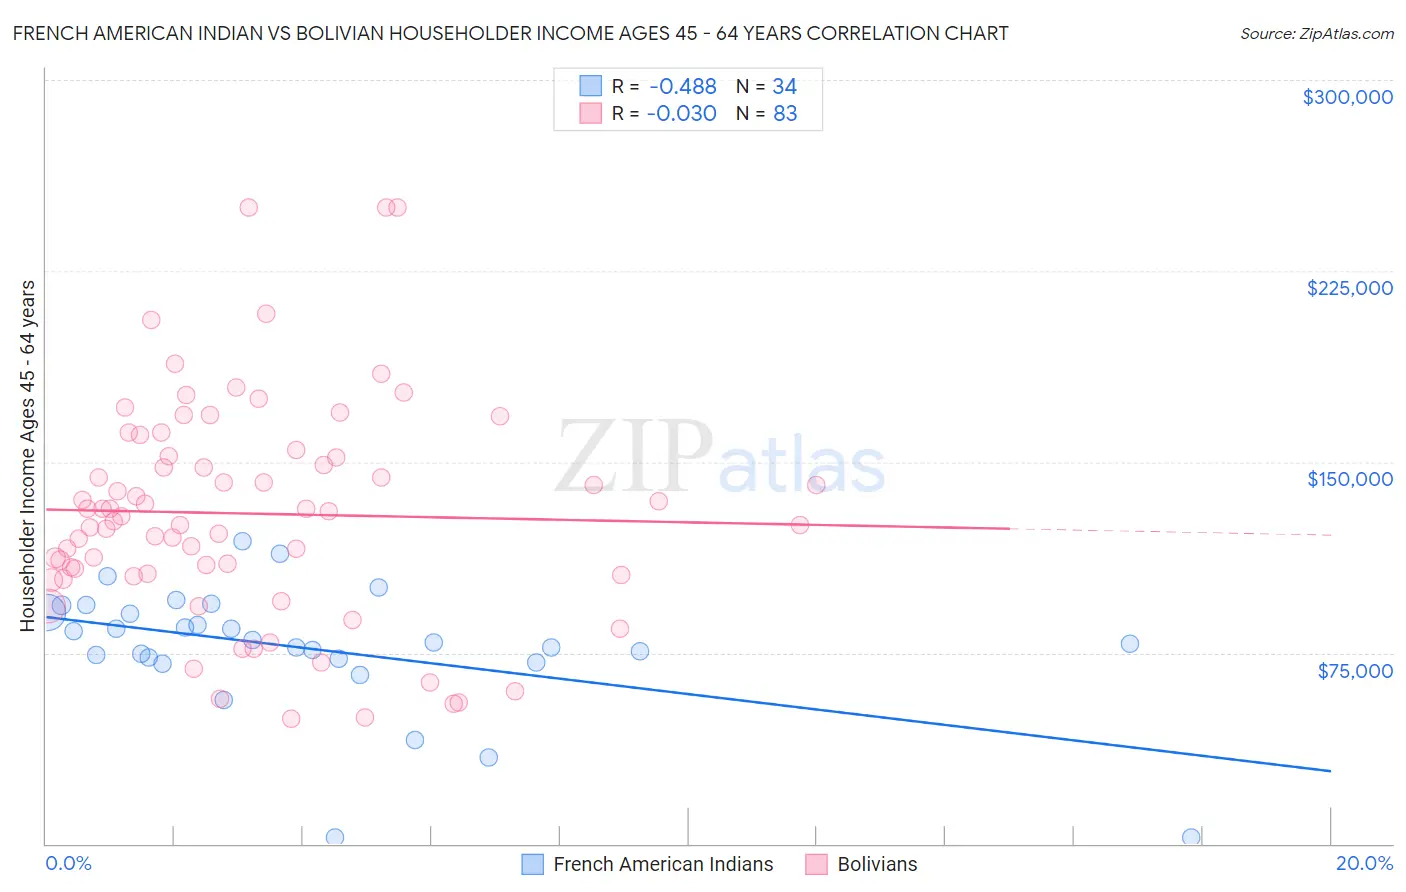 French American Indian vs Bolivian Householder Income Ages 45 - 64 years